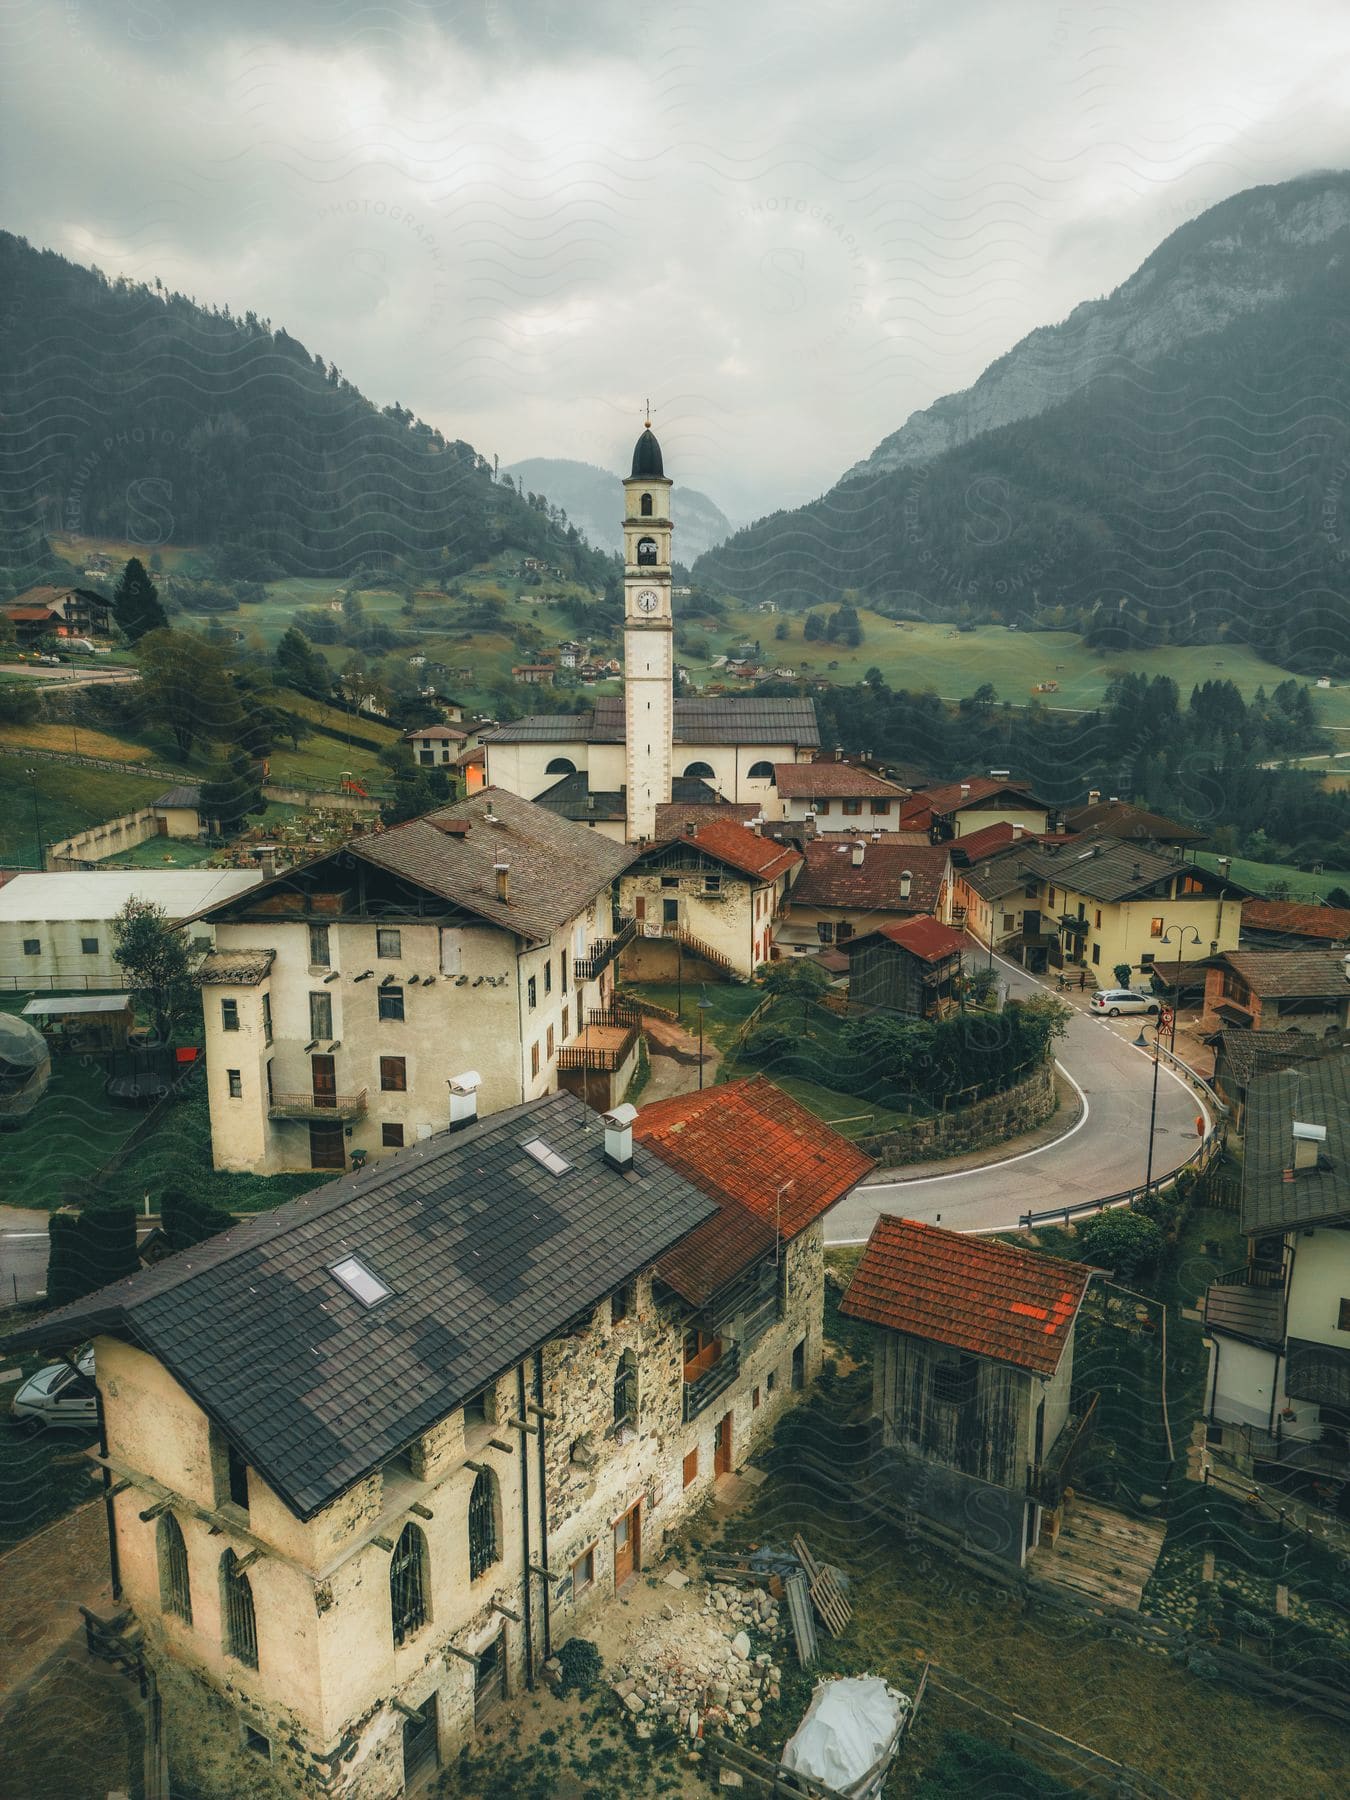 A bell tower sits in the middle of a small mountain village on a cloudy, summer day.